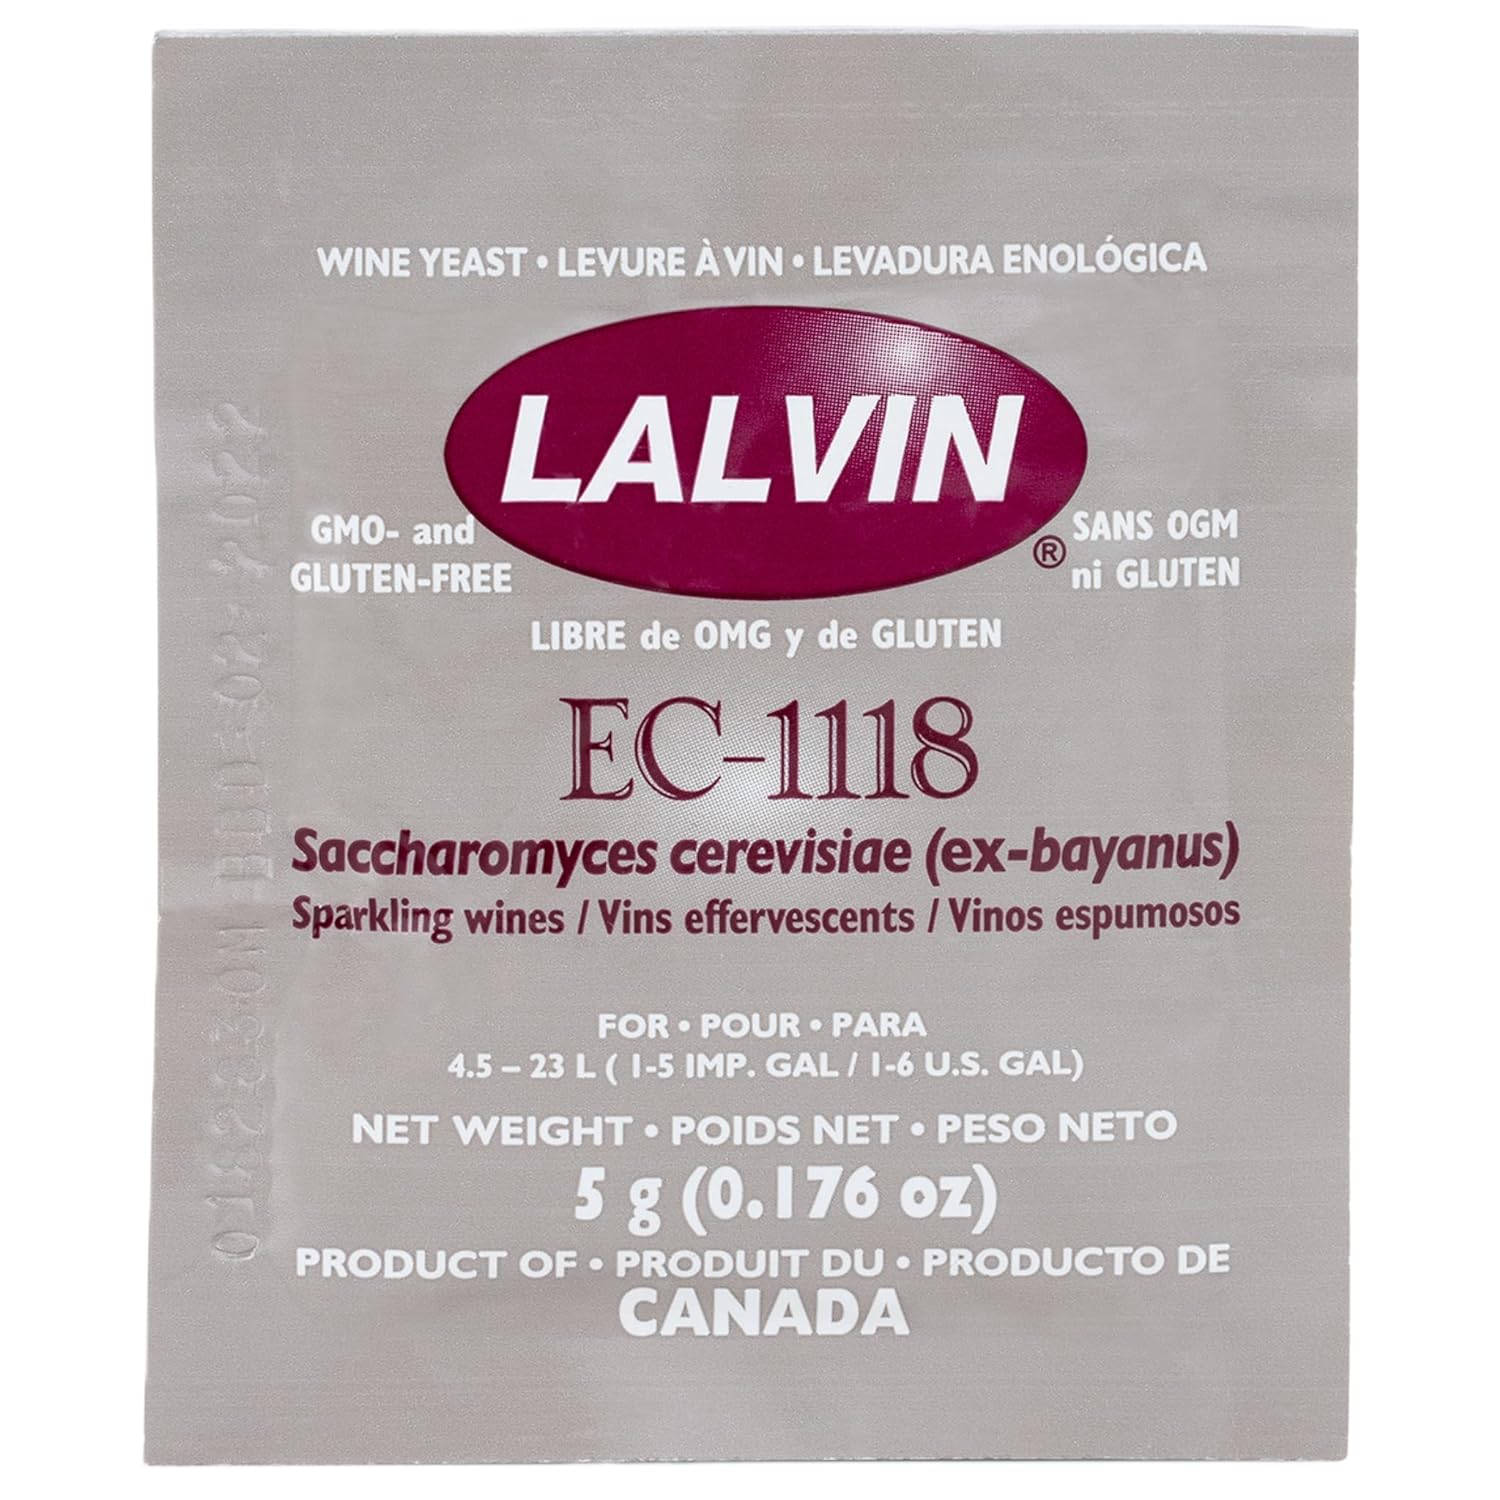 Lalvin EC-1118 Wine Yeast: The Perfect Choice for Homemade Wine, Cider, Mead, and Kombucha